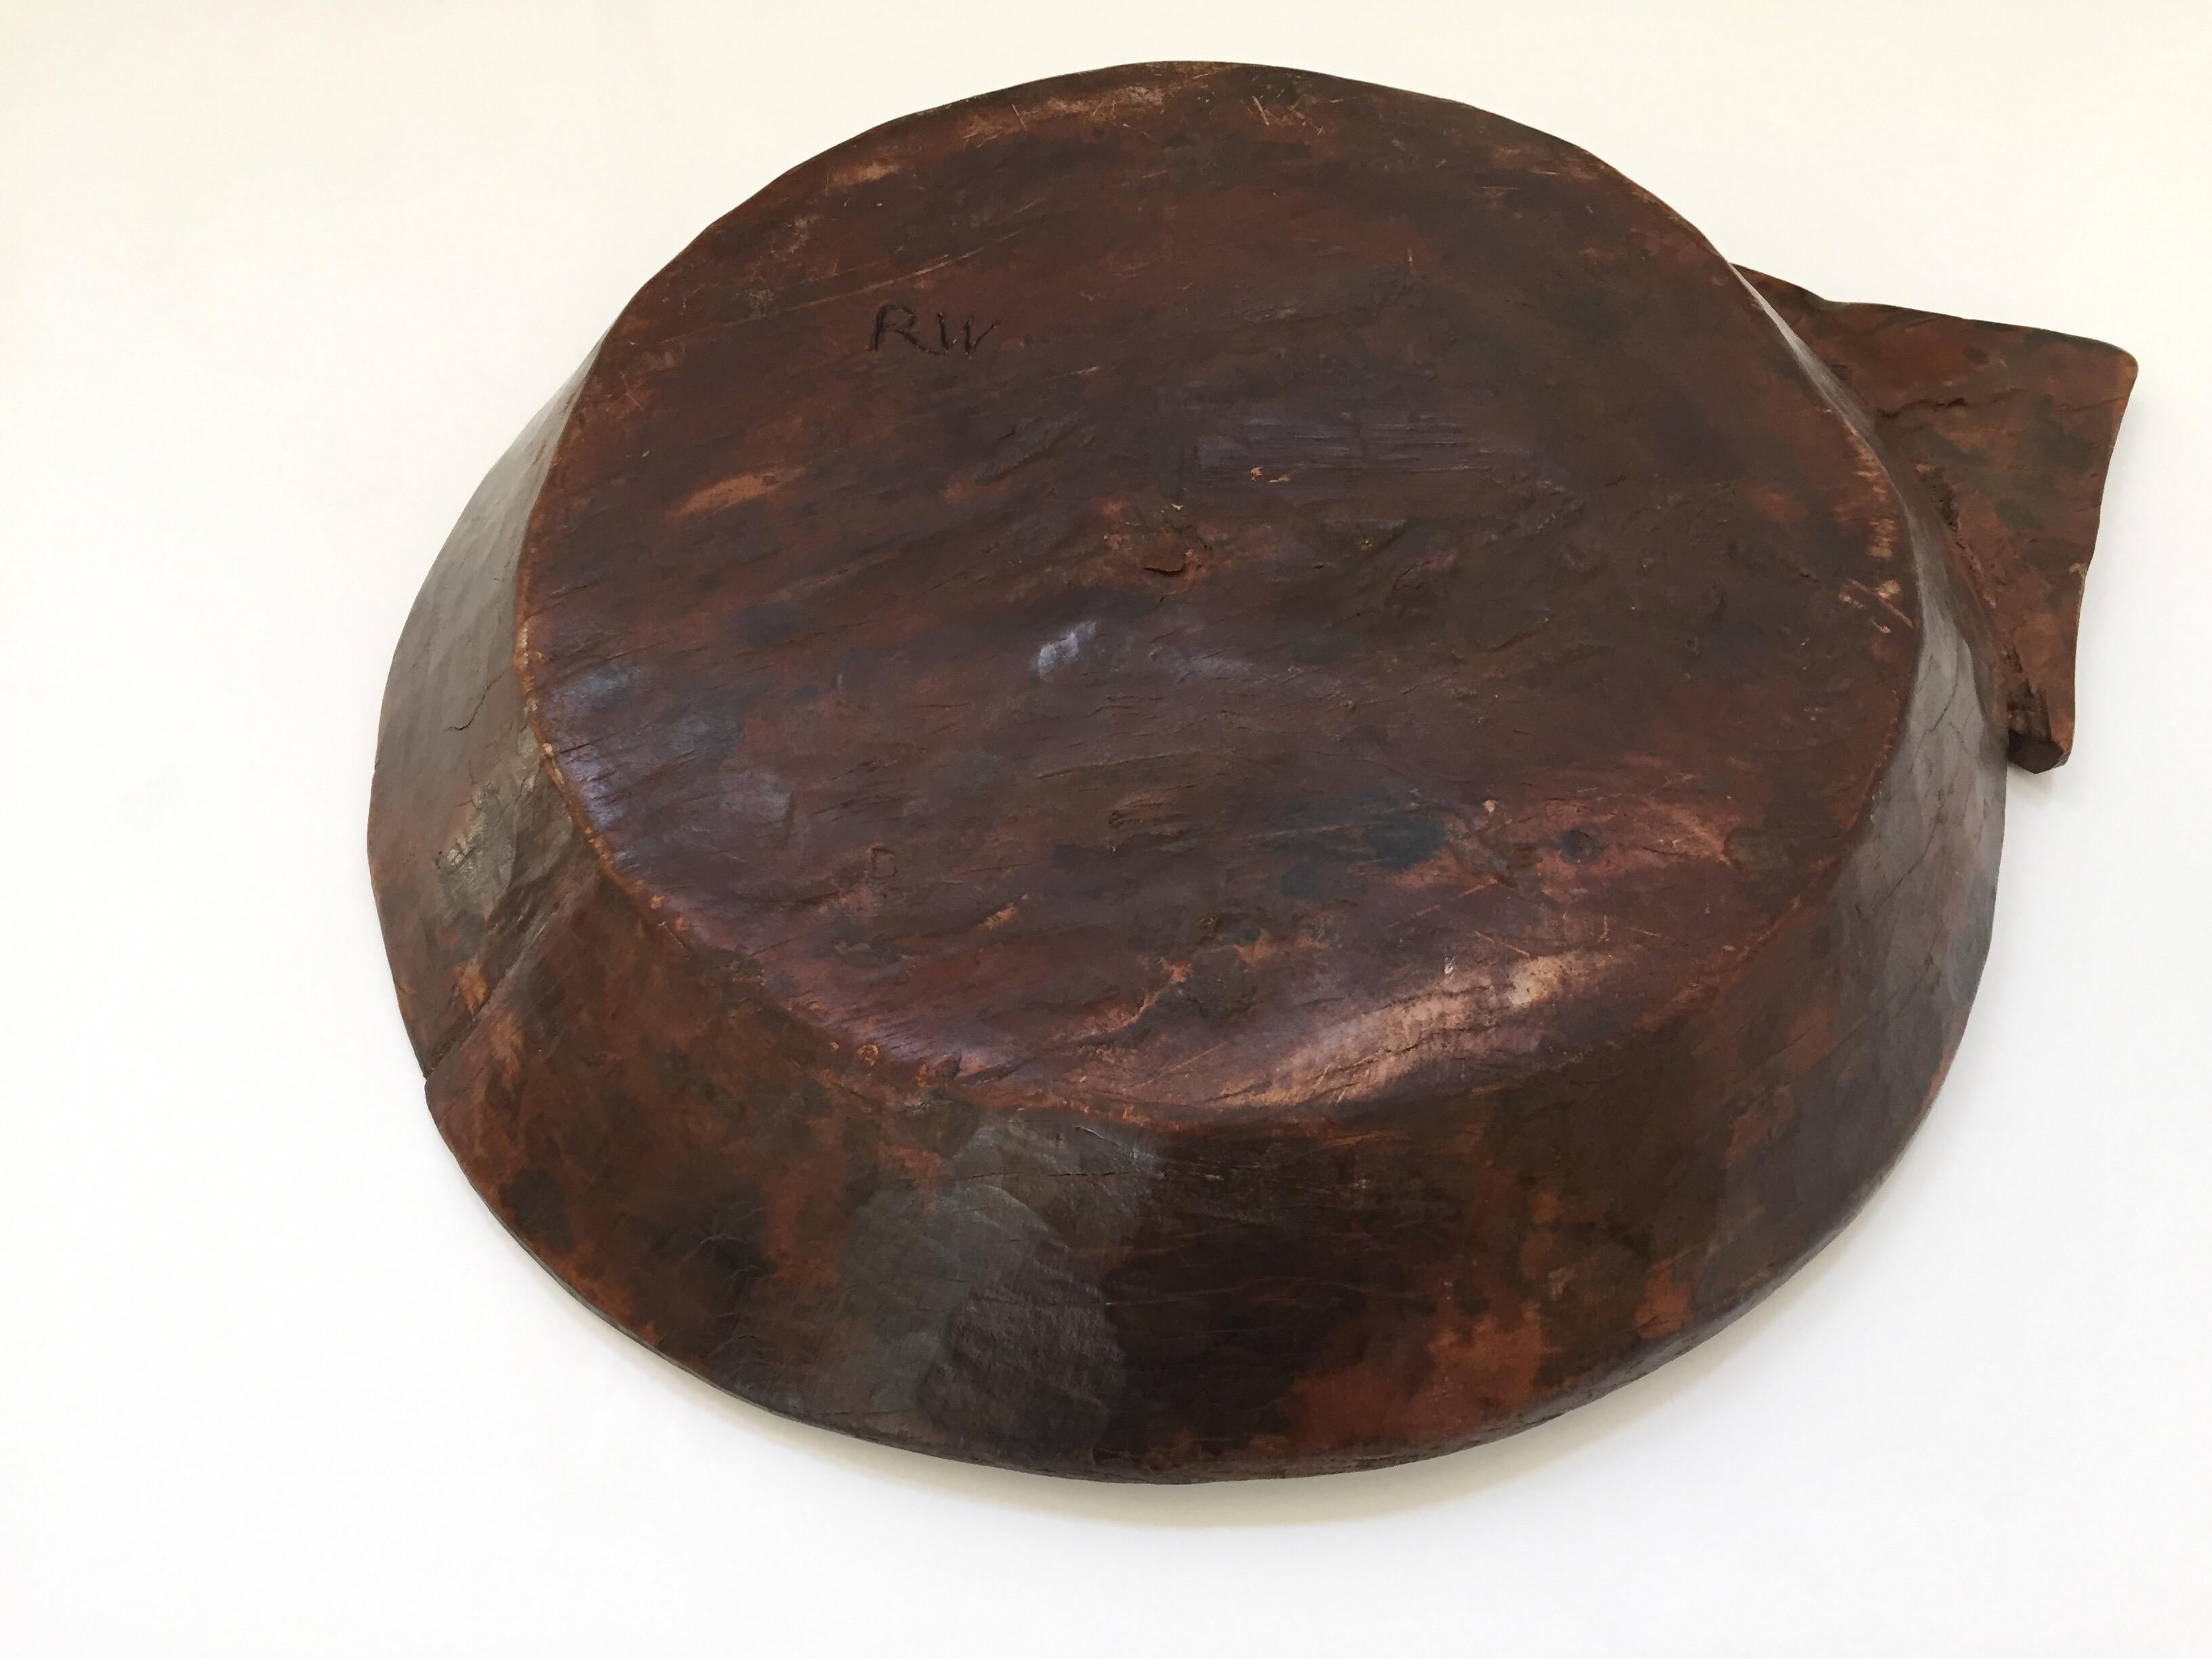 Large tribal wooden bowl or tray from the Batak of Sumatra, mid-20th century.
Scaramanga's bowls are authentic old hand carved wooden bowls with small marks, imperfections and variations in color, which are consistent with their age and original